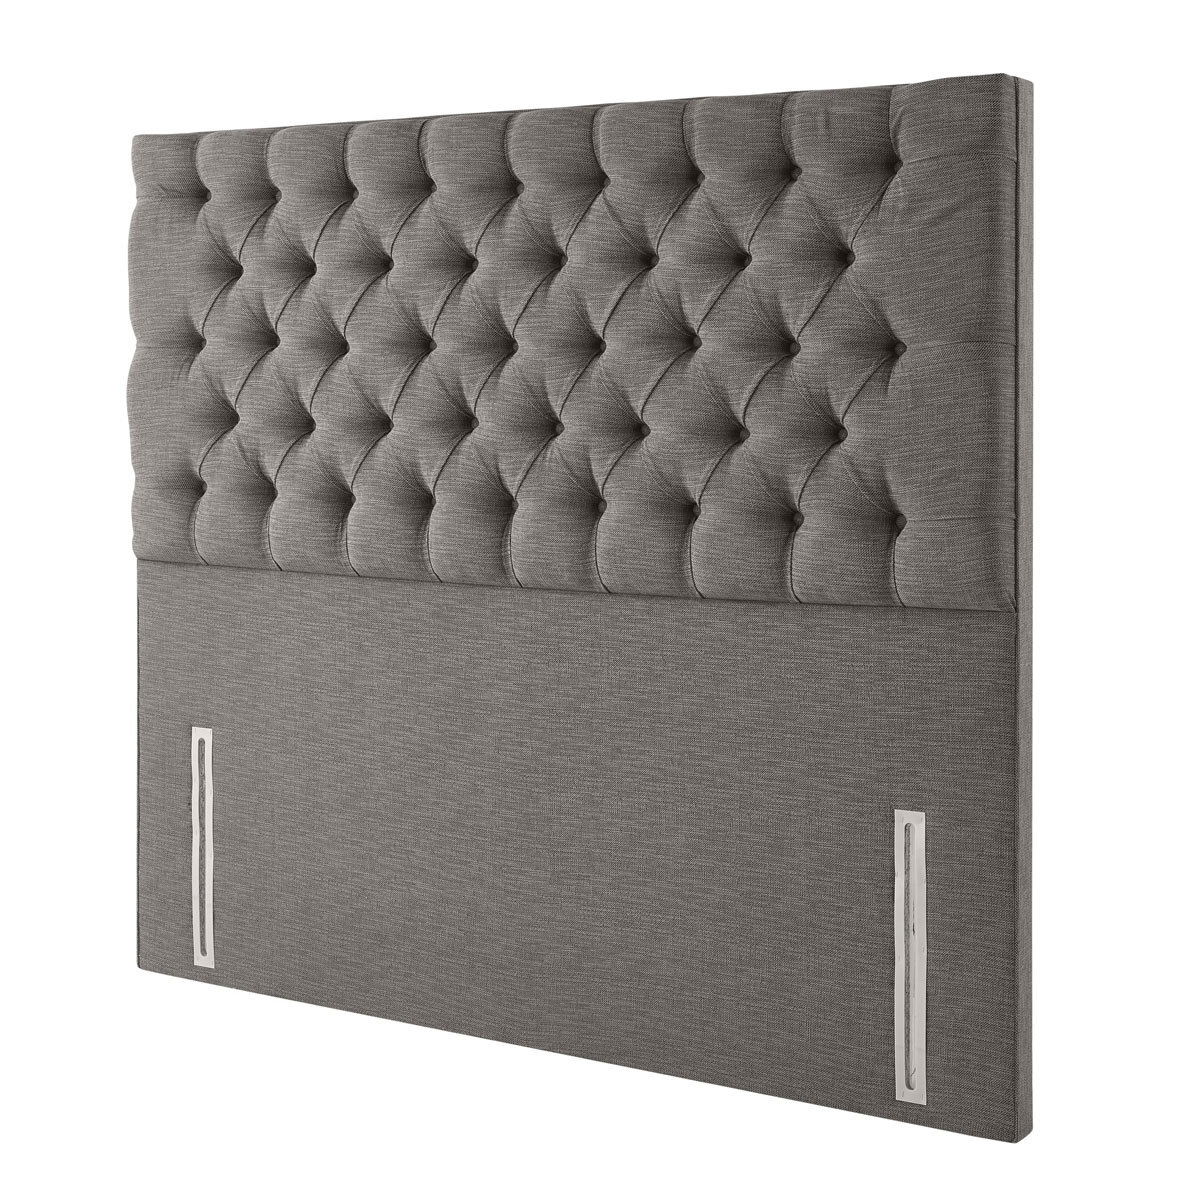 Pocket Spring Bed Company Ravello Grey Fabric Full Height...